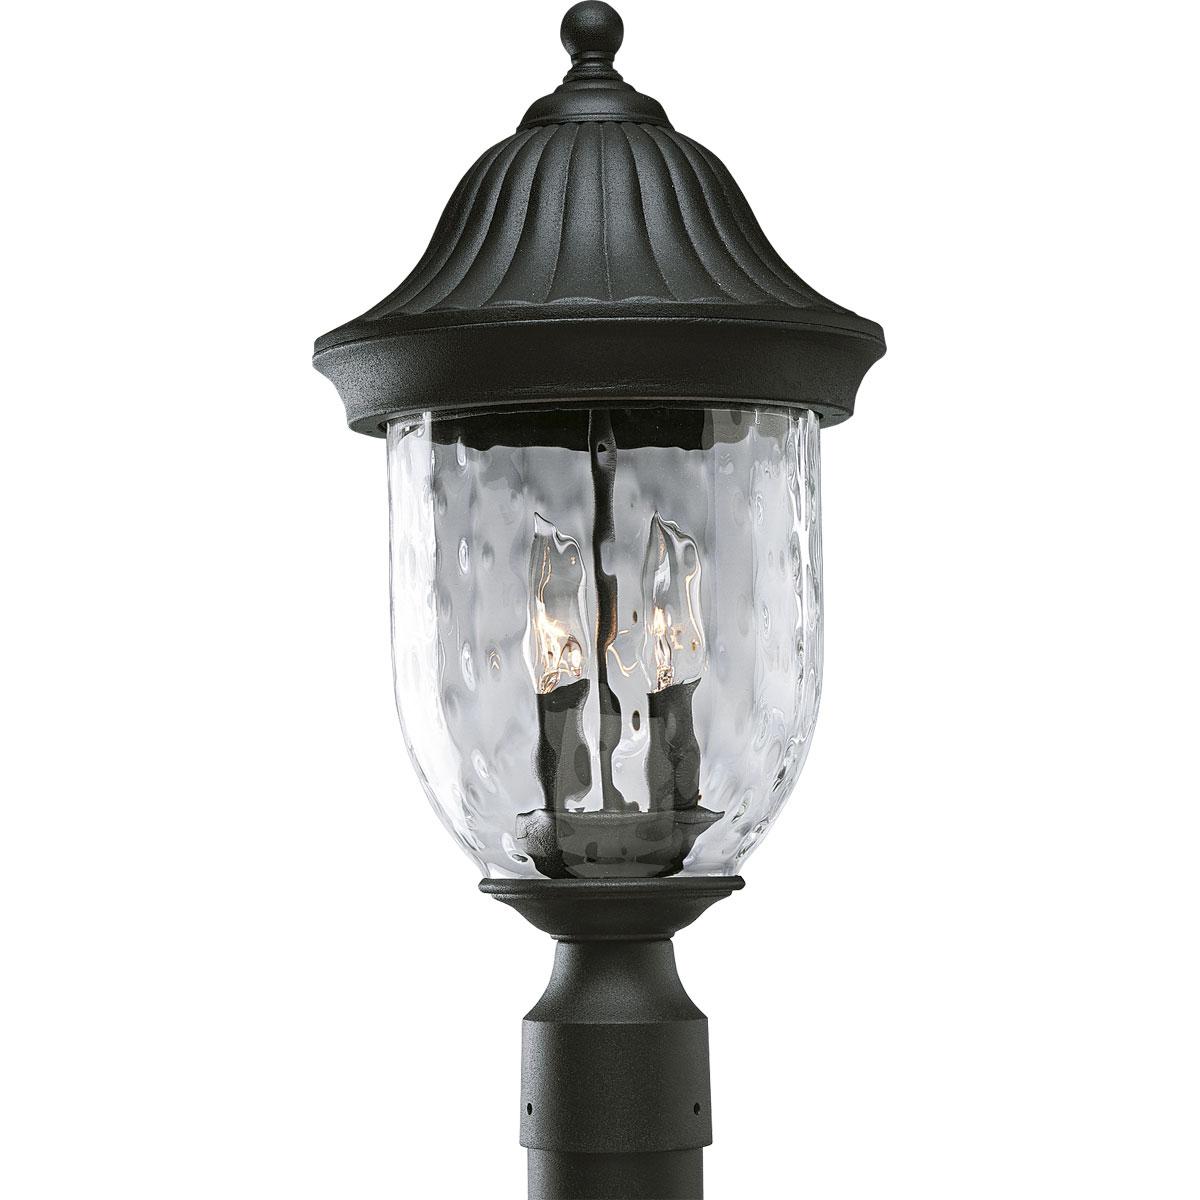 Hubbell P5429-31 Capture the romance with this two-light post lantern from the Coventry collection that features optic hammered glass, stylized cap and Sheppard's hook. Die-cast aluminum construction. Textured Black finish.  ; Textured Black finish. ; Optic hammered glass